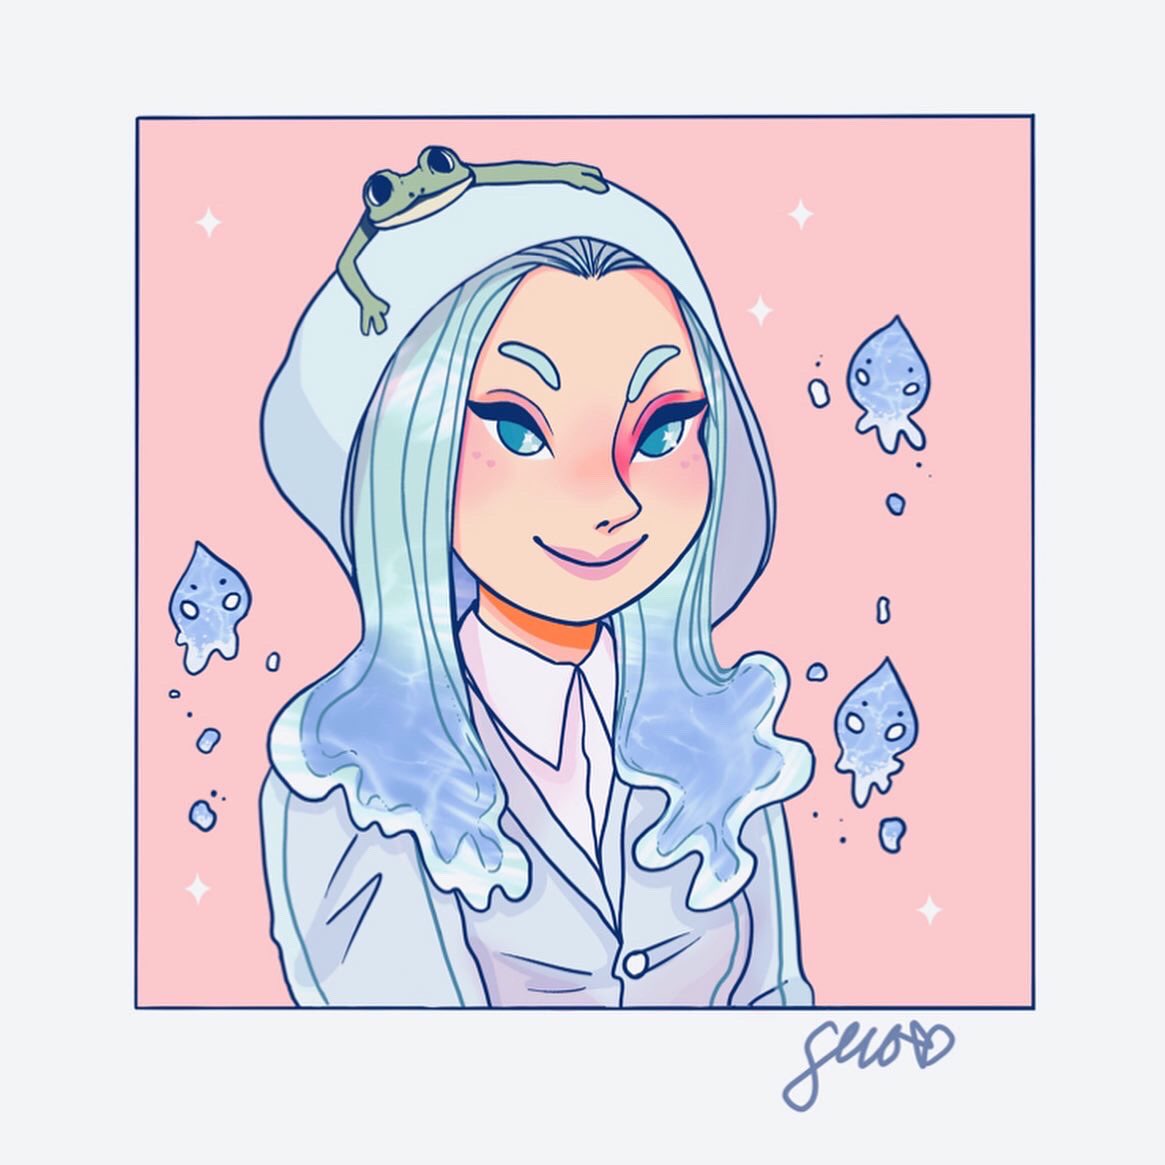 I’ll start! He everyone I’m Sid, a traditional and digital artist that loves drawing witchy art, cute girls, and plants! Currently trying to take part in Mermay as well!